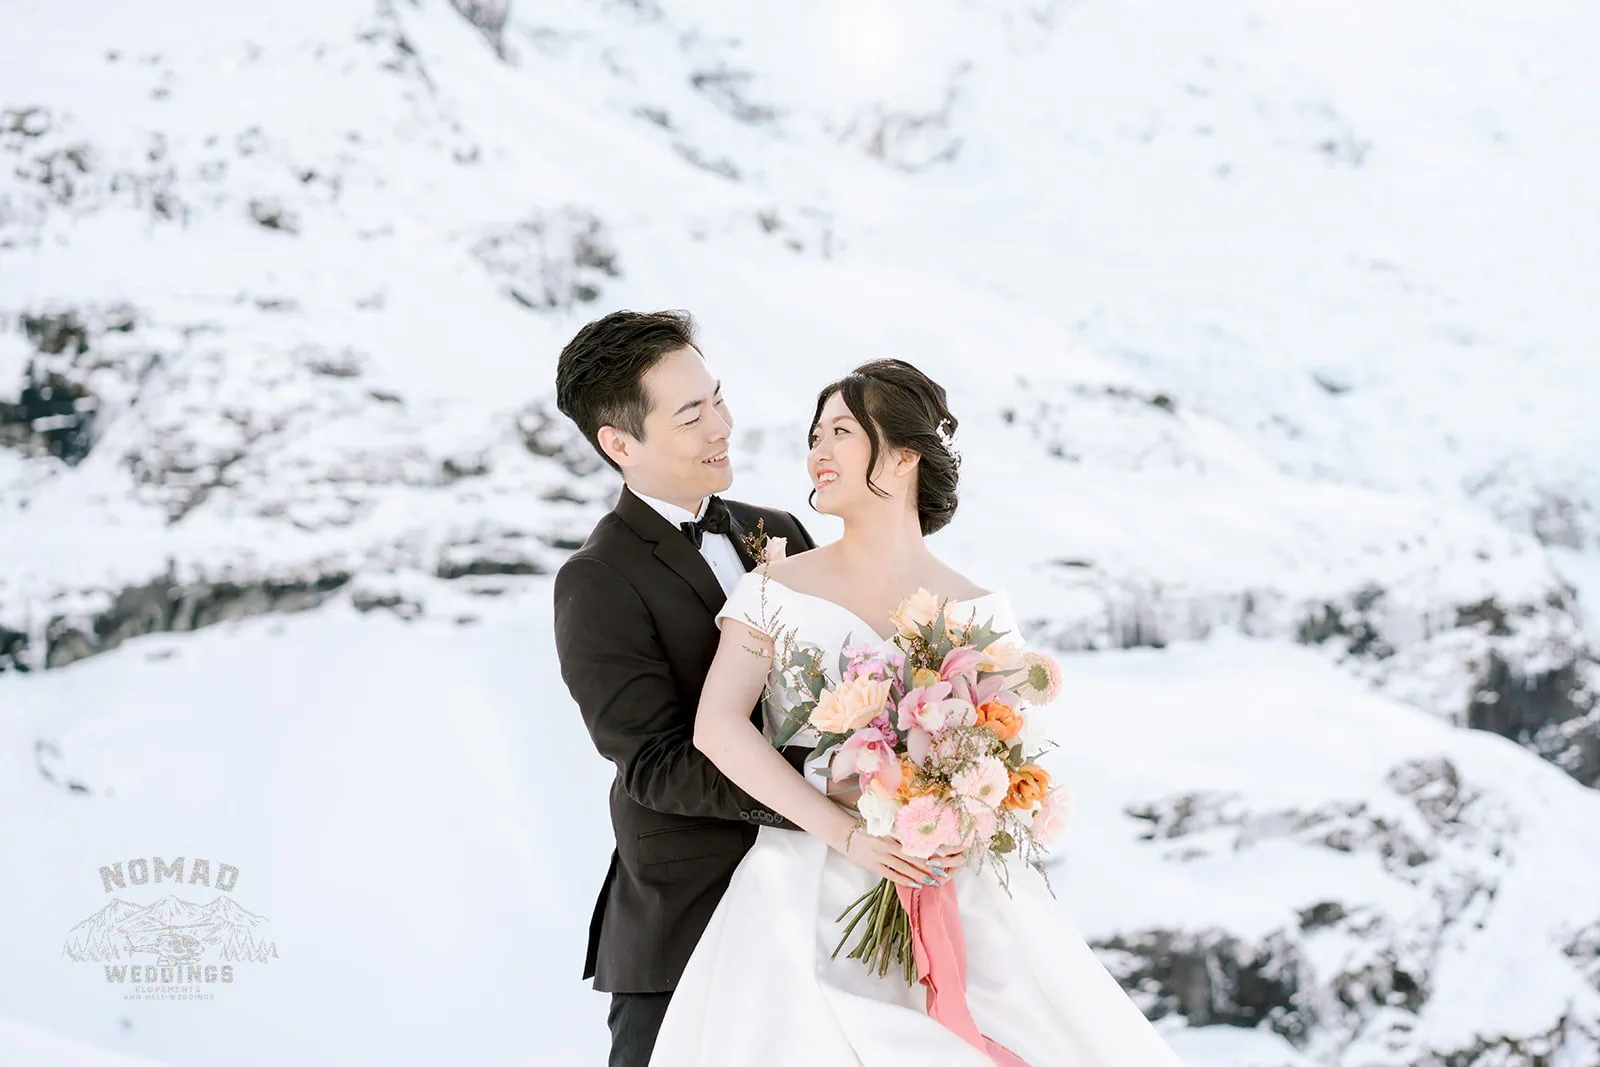 Queenstown New Zealand Elopement Wedding Photographer - Bo and Junyi, a bride and groom, embark on an adventurous Heli Pre Wedding Shoot with 4 landings, capturing breathtaking moments atop a snow covered mountain.